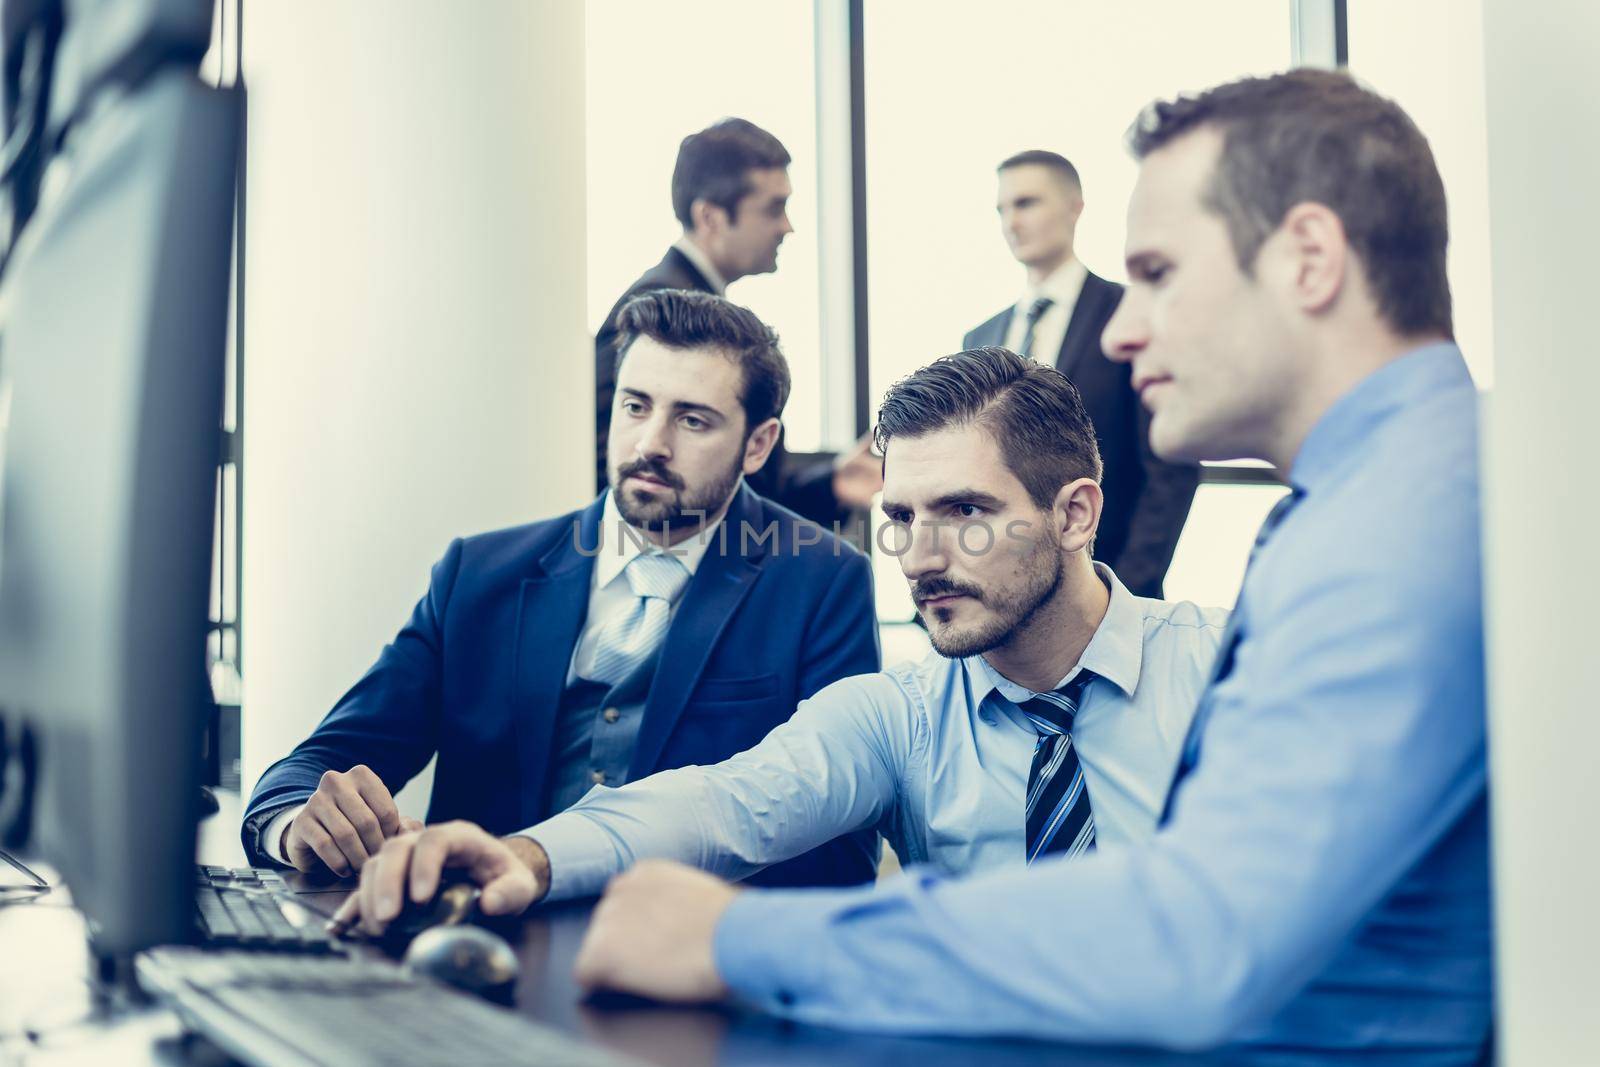 Business team working in corporate office. Businessmen trading stocks. Stock traders looking at graphs, indexes and numbers on multiple computer screens. Business success concept.